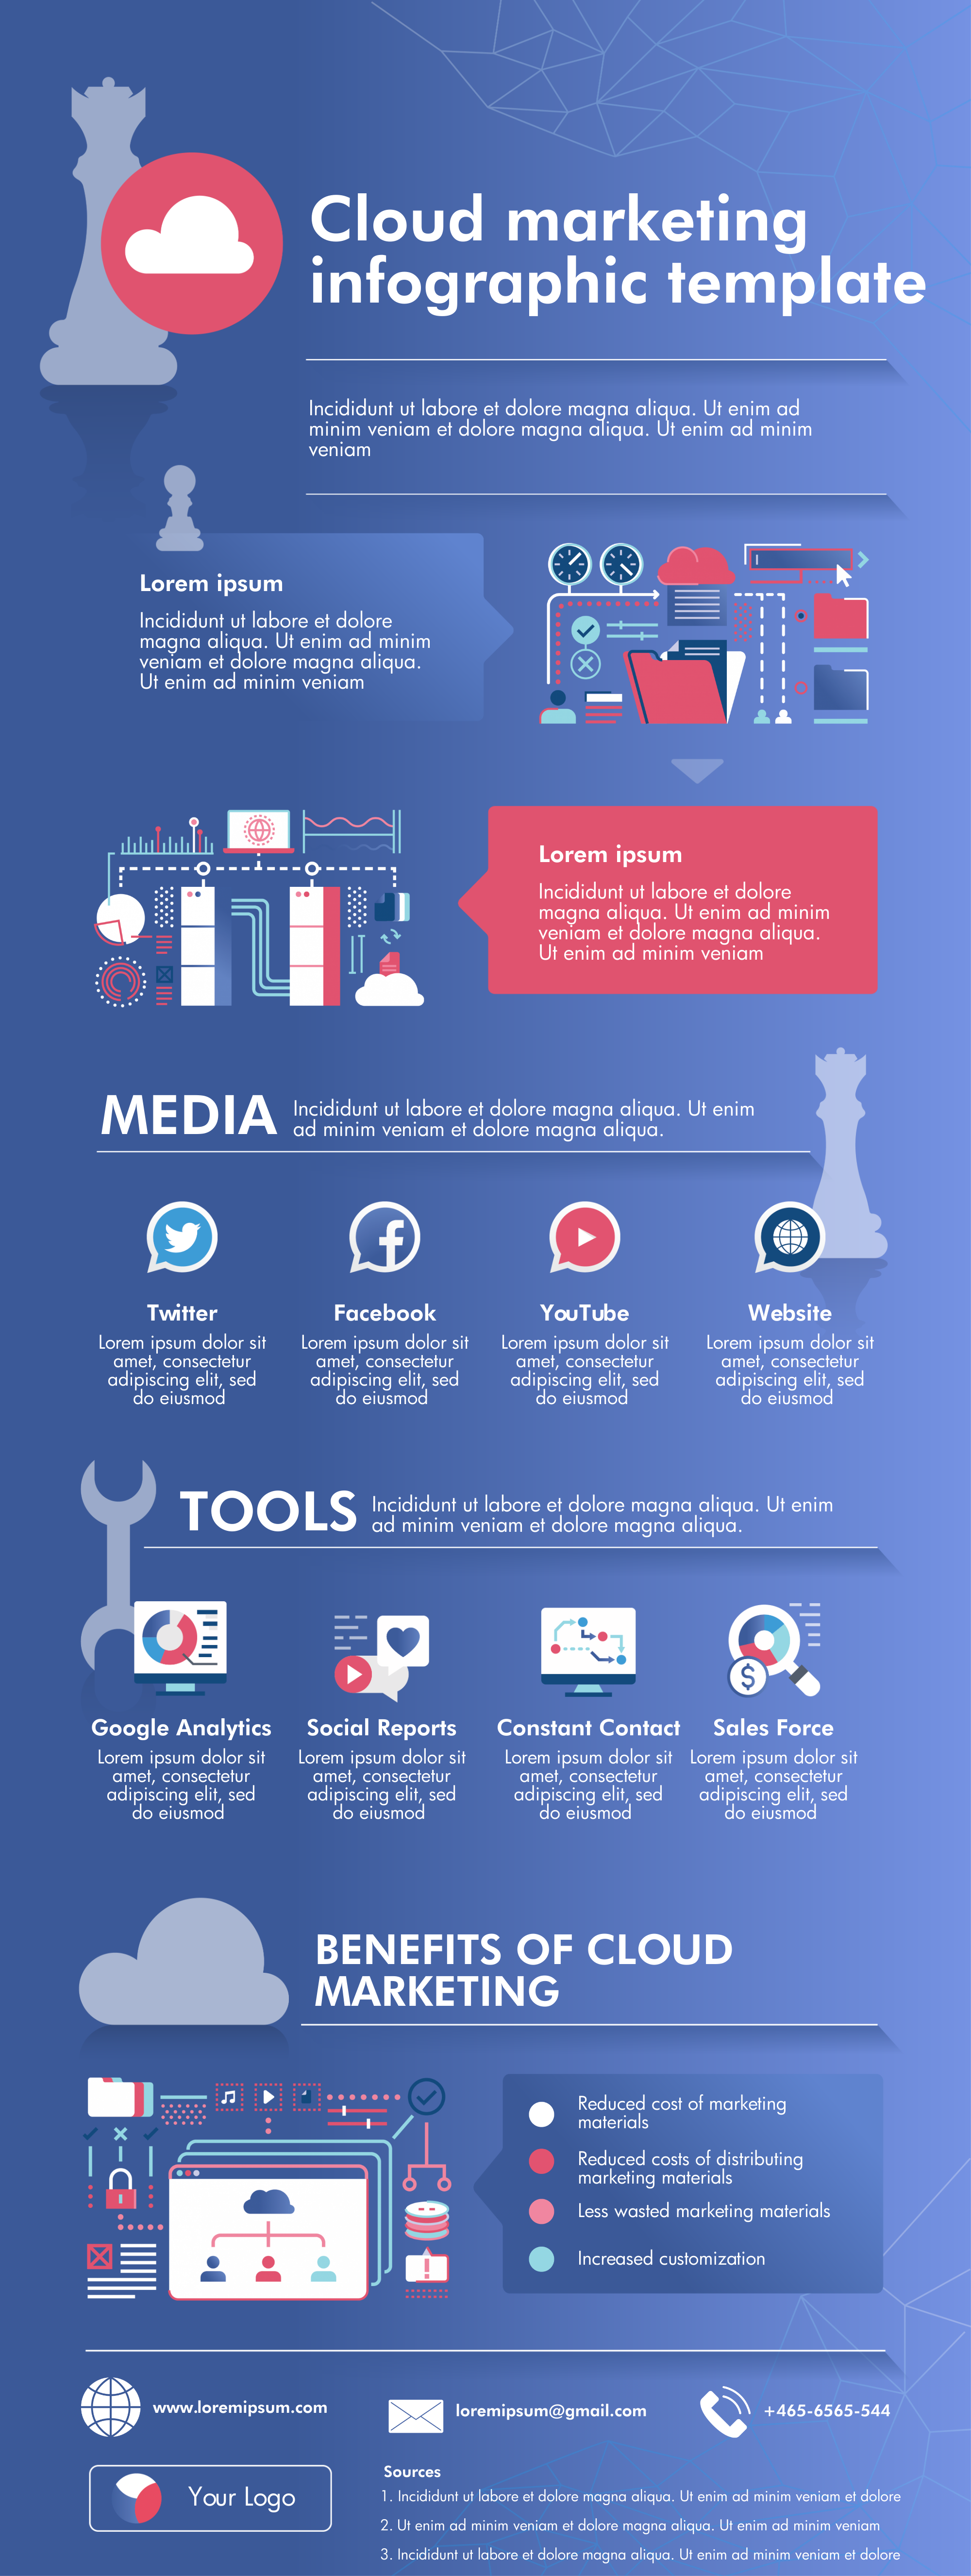 Cloud marketing infographic template